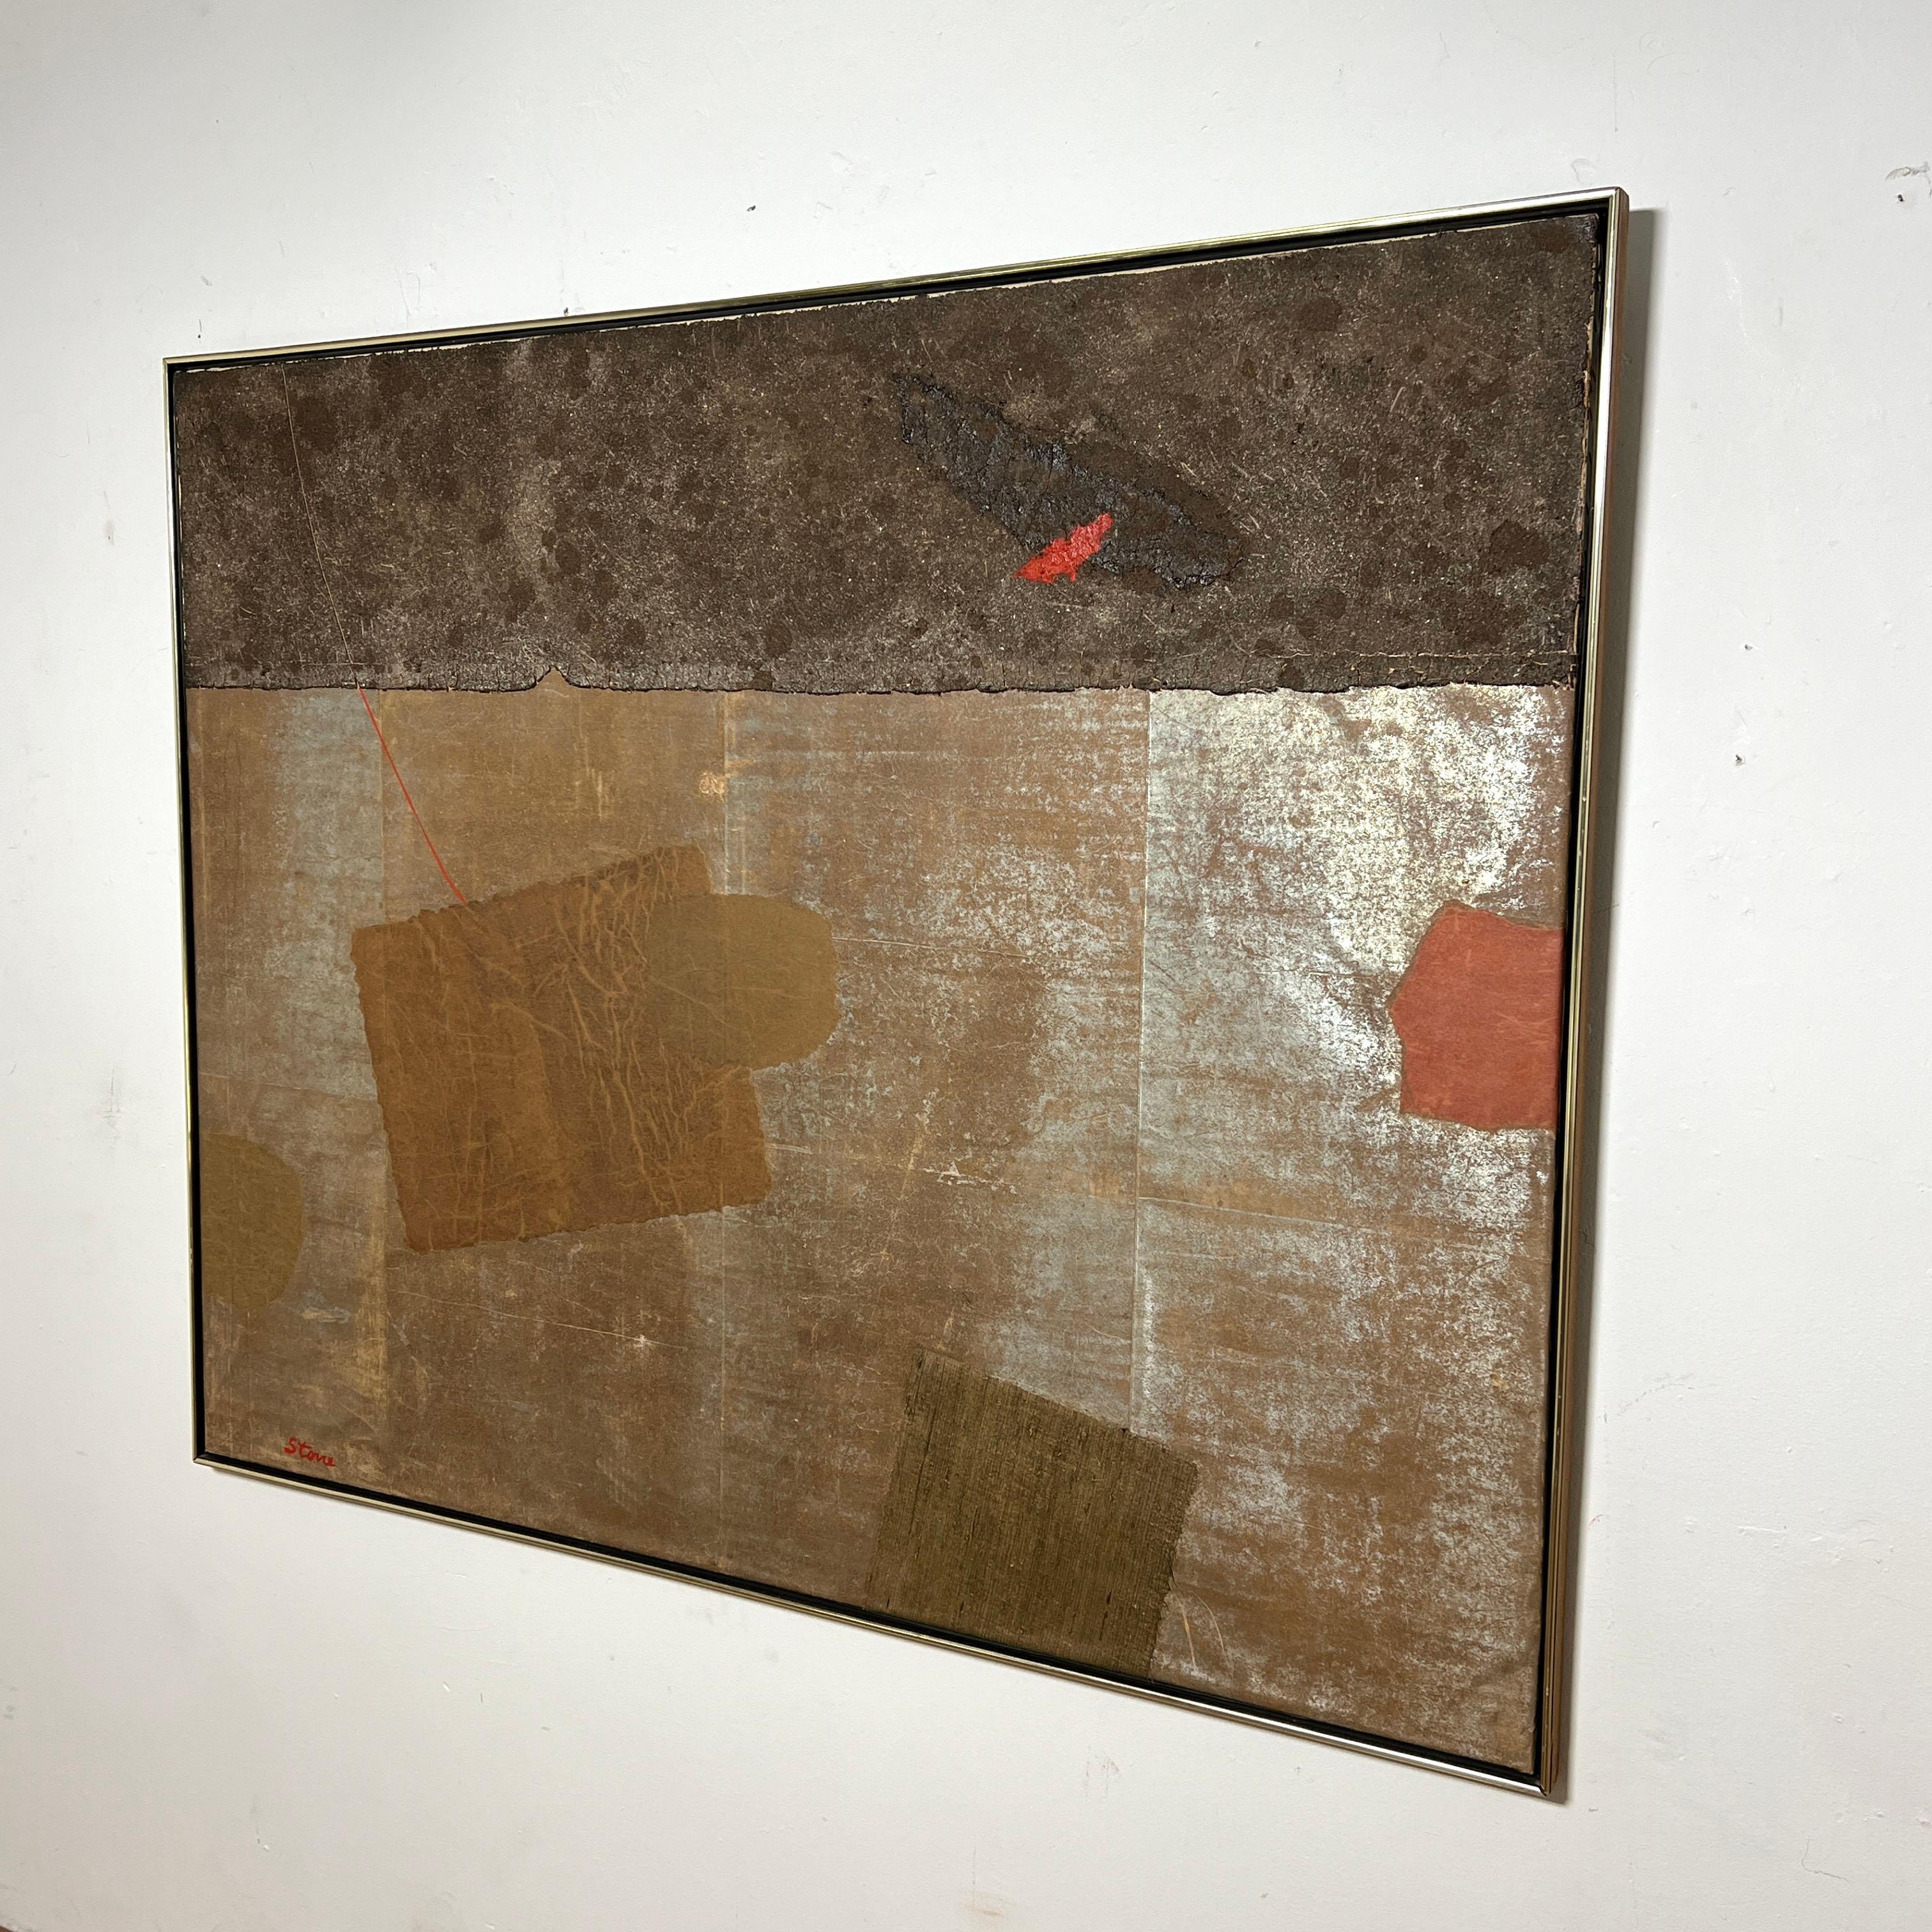 Large scale (four foot by five foot) abstract mixed media work on canvas, paint and paper, ca. 1970s, signed Stone.